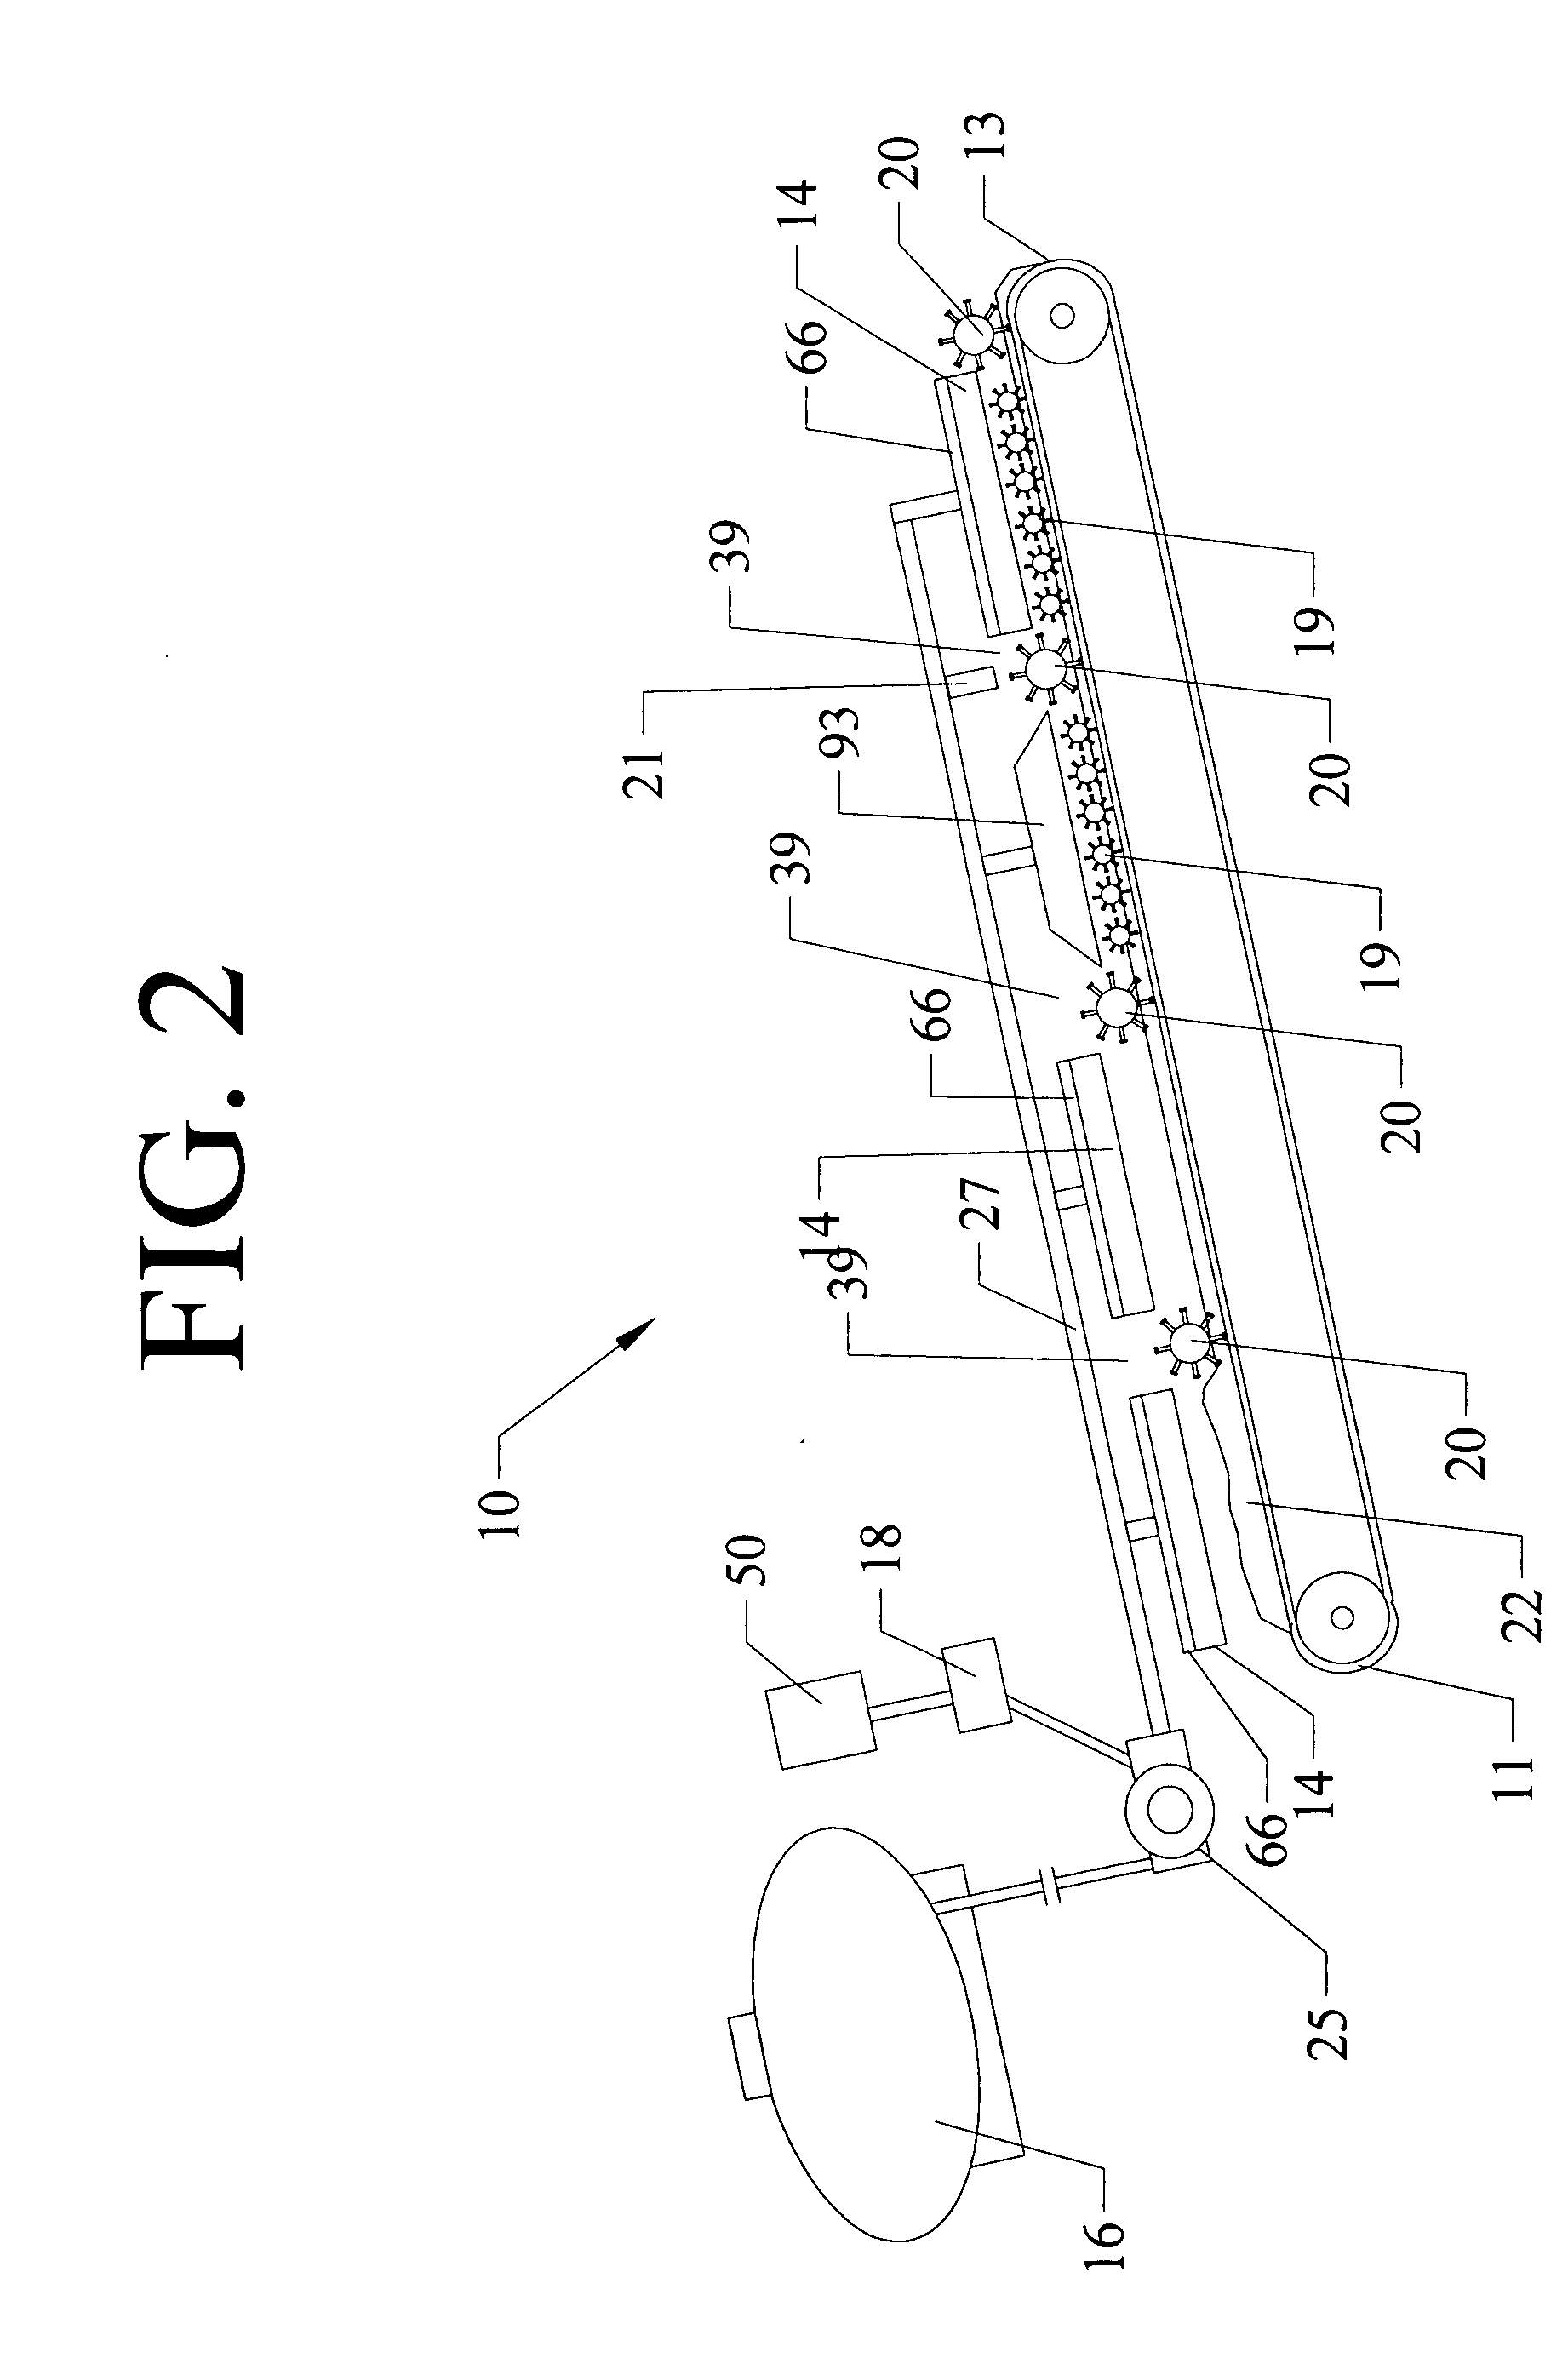 Aggregate pre-heating systemsand method